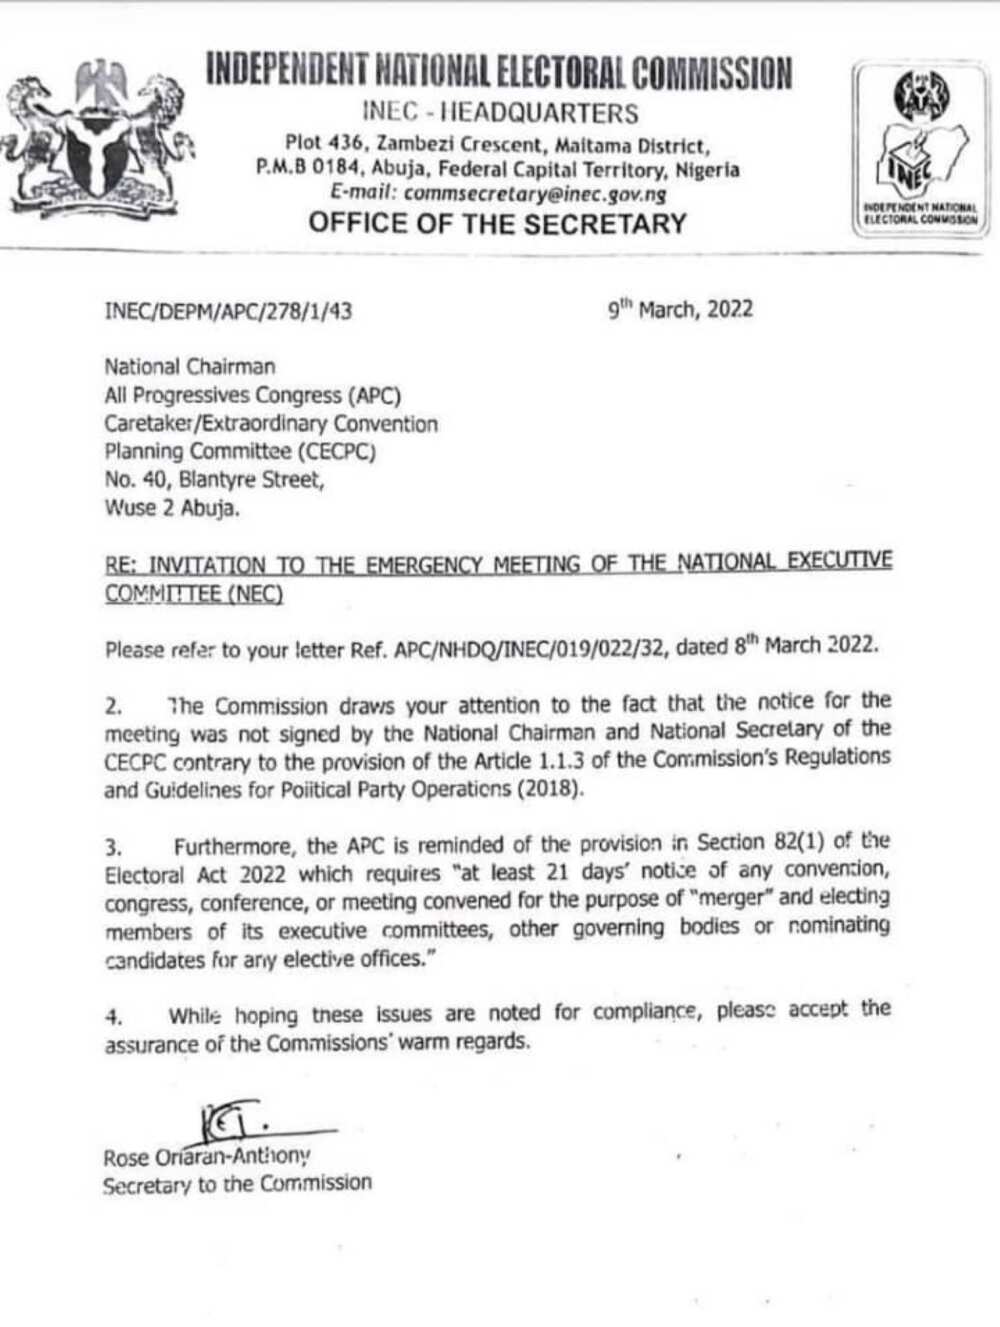 INEC letter to Governor Bello